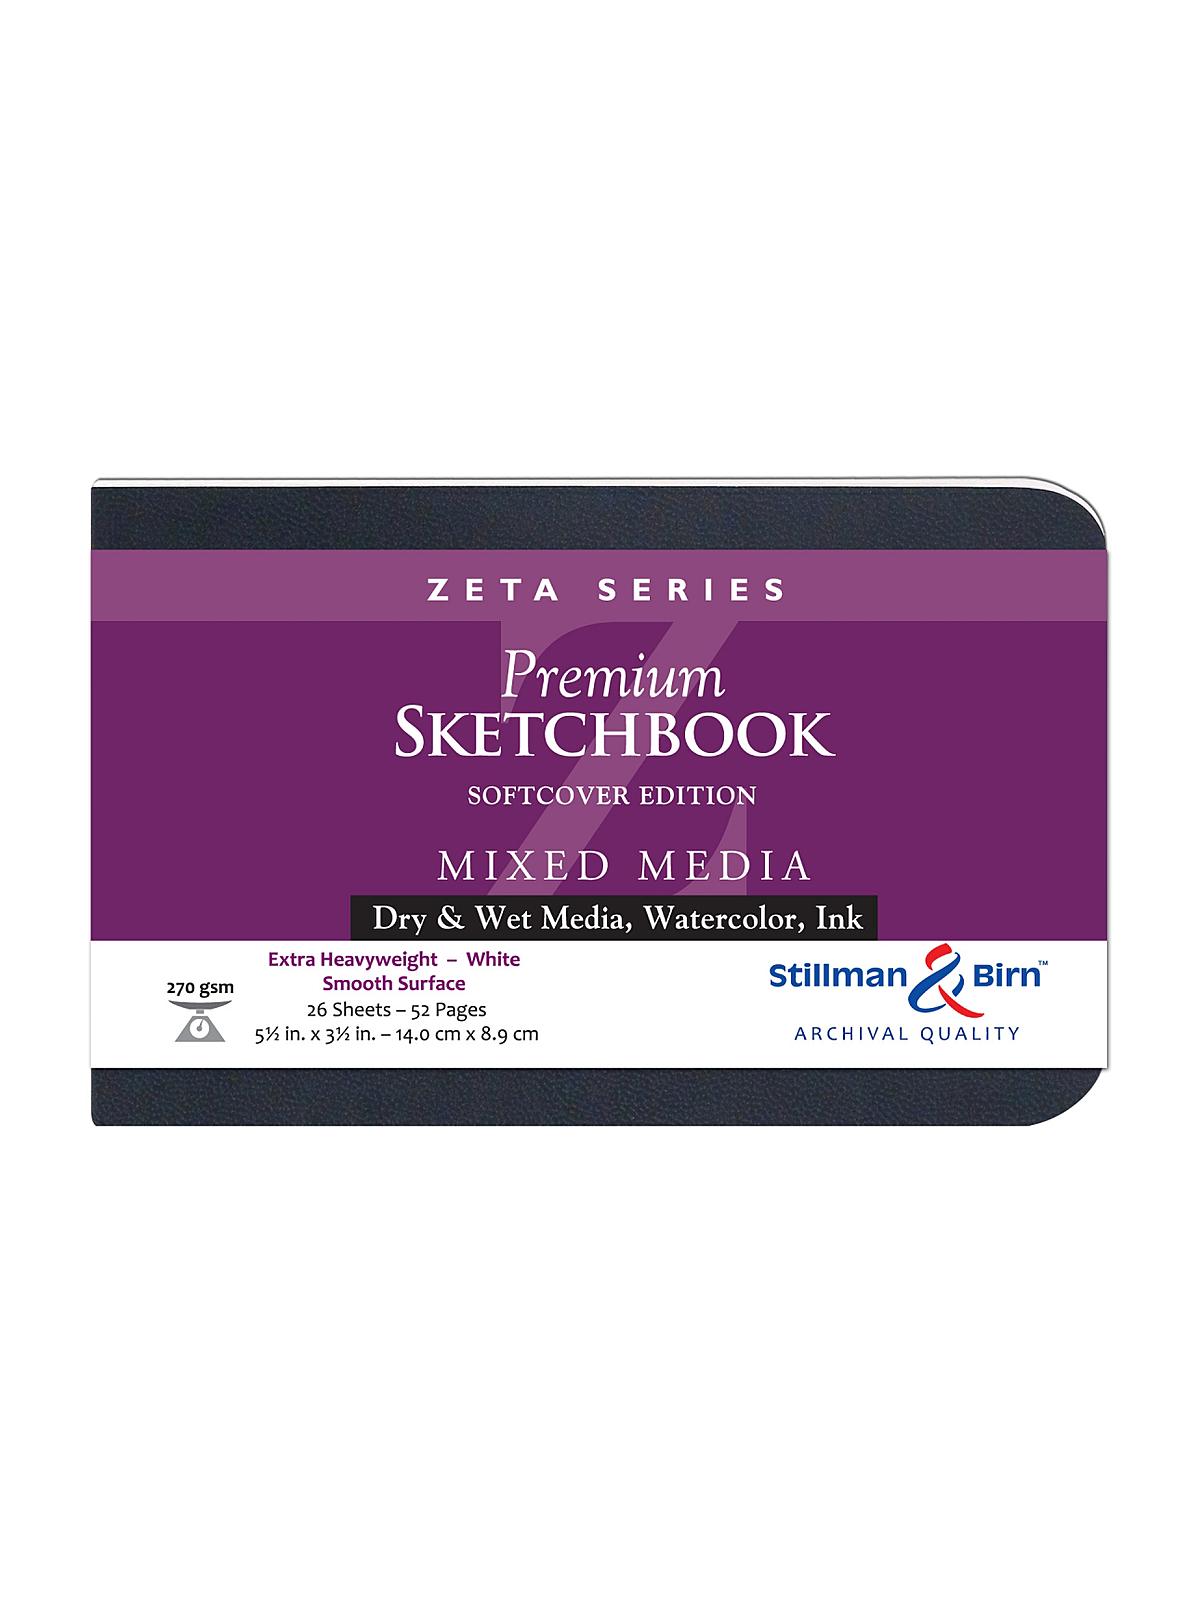 Zeta Series Softcover Sketchbook 5.5 In. X 3.5 In. Landscape 56 Pages